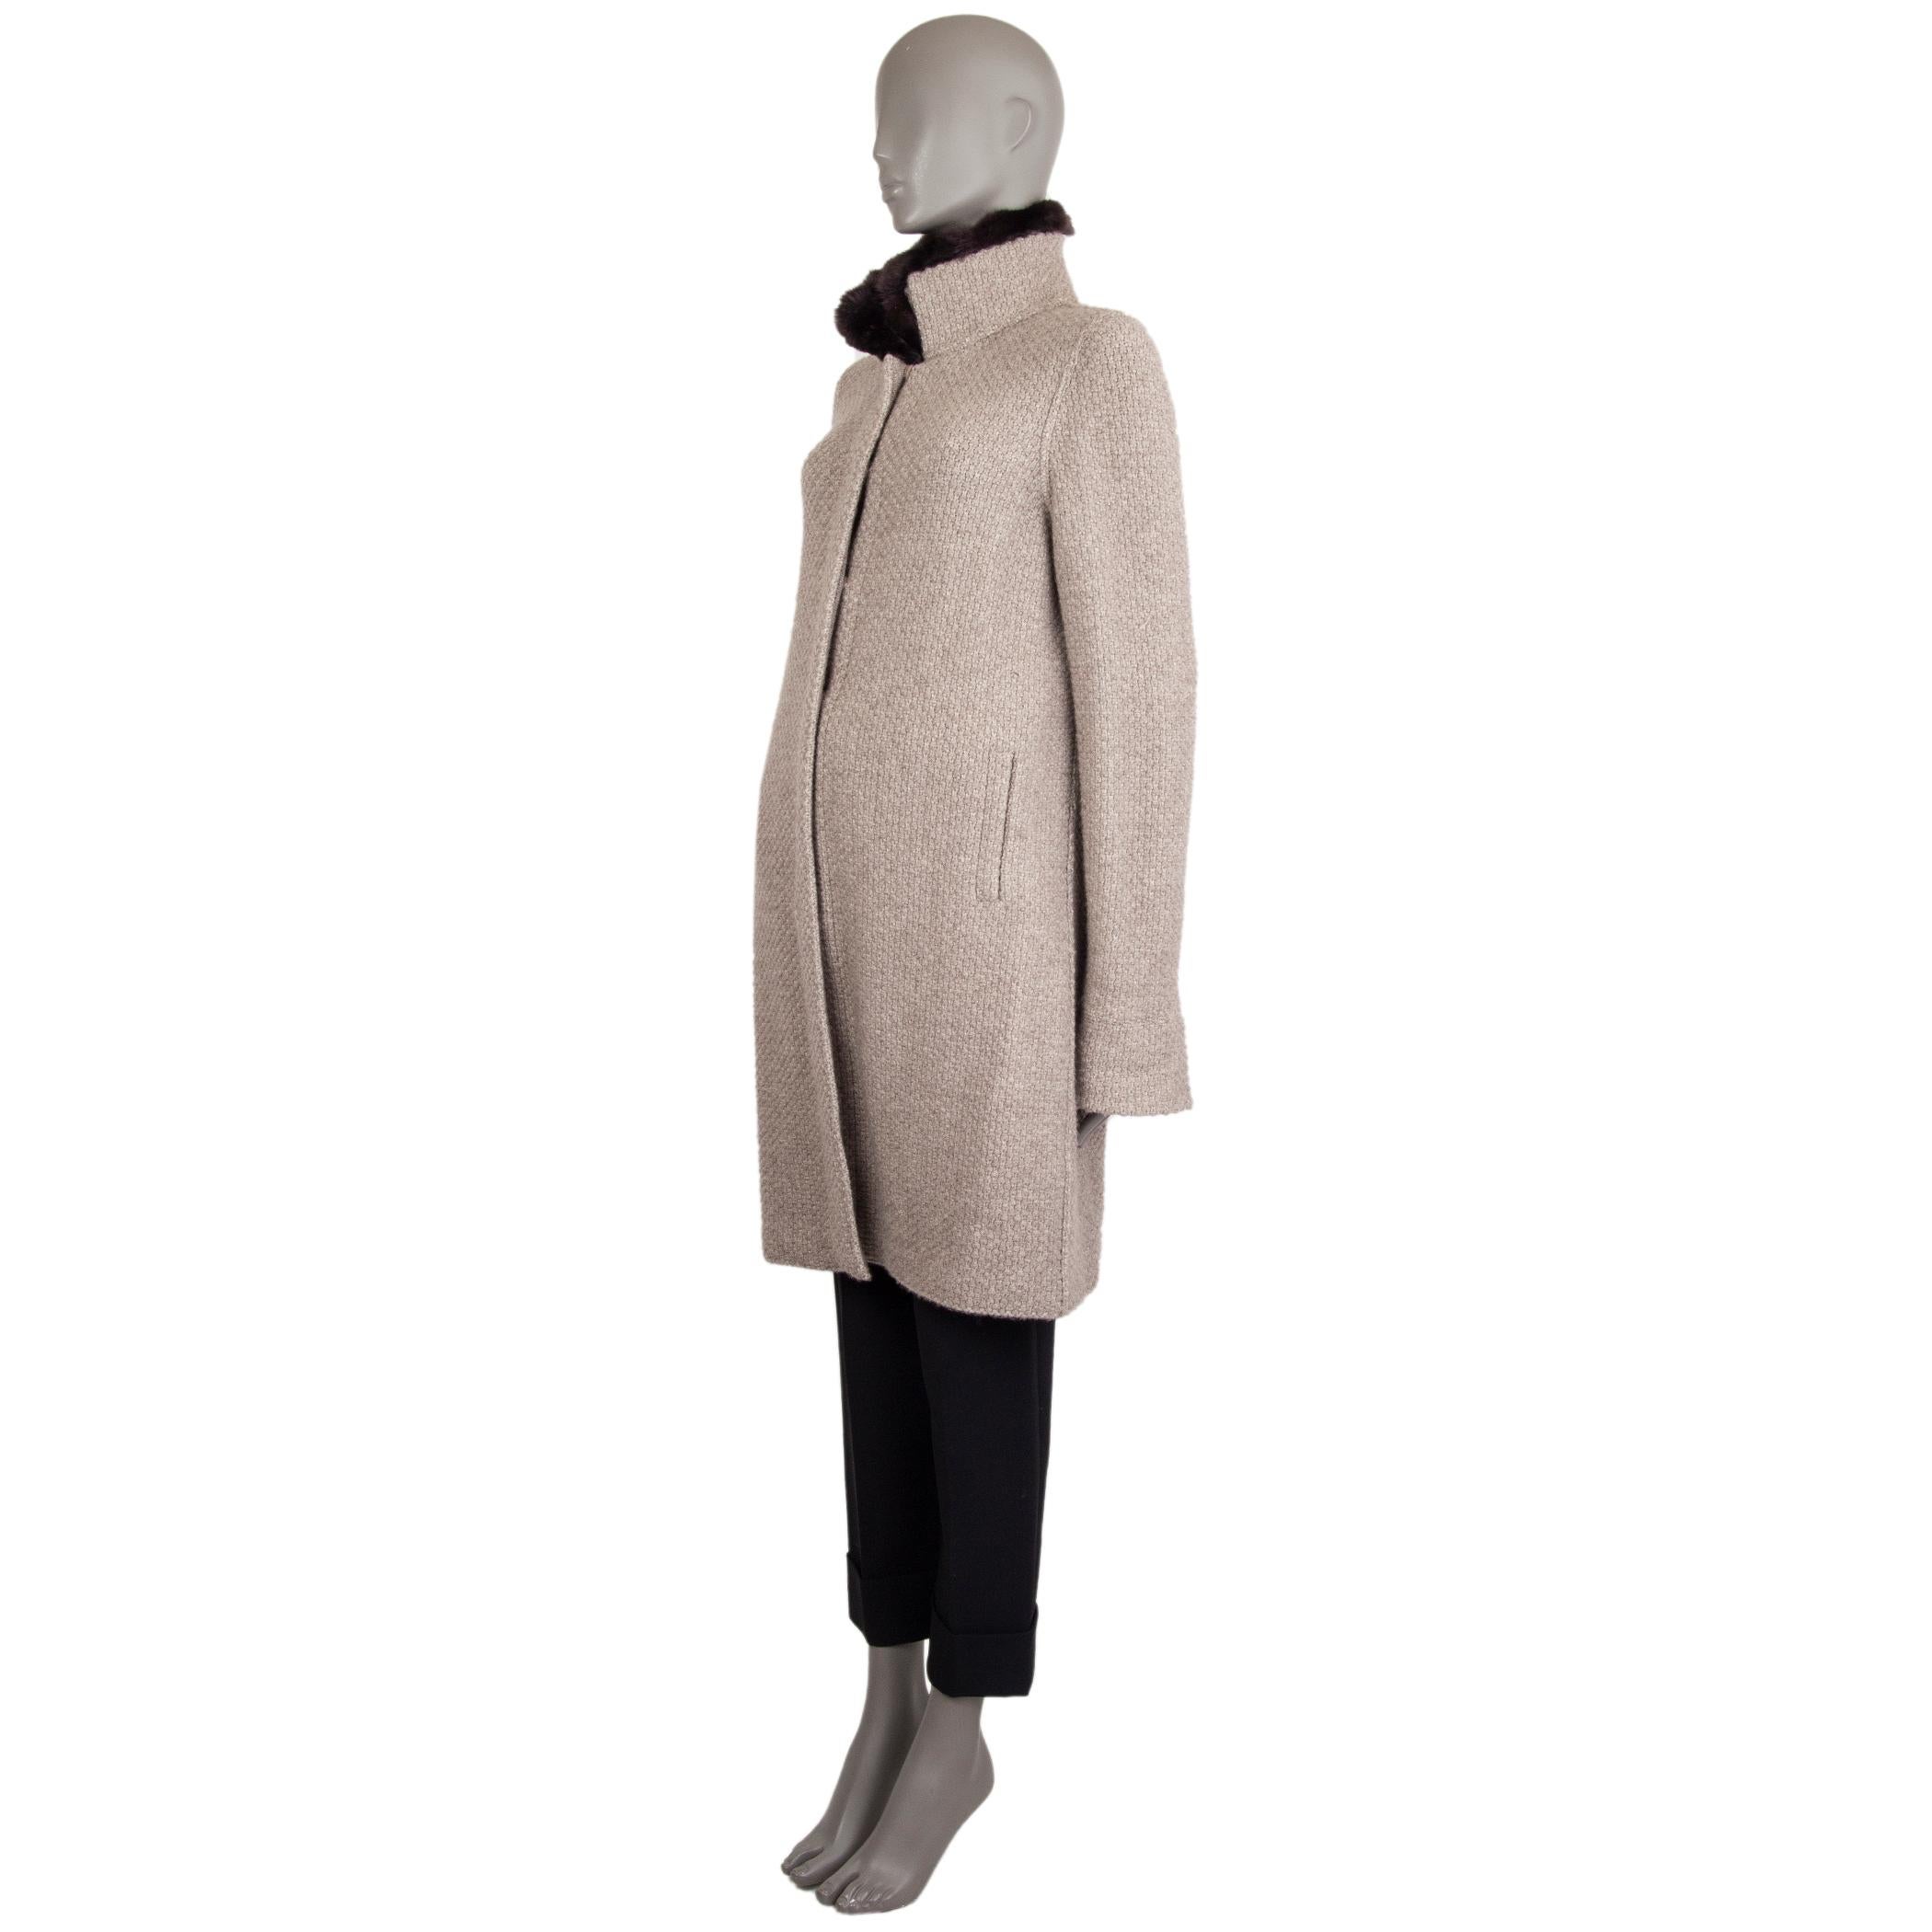 100% authentic Loro Piana boucle-knit coat in light taupe cashmere (100%). With removable collar in dark brown chinchilla, two pockets on the sides, and slit cuffs. Closes with concealed snaps on the front. Unlined. Has been worn and is in excellent